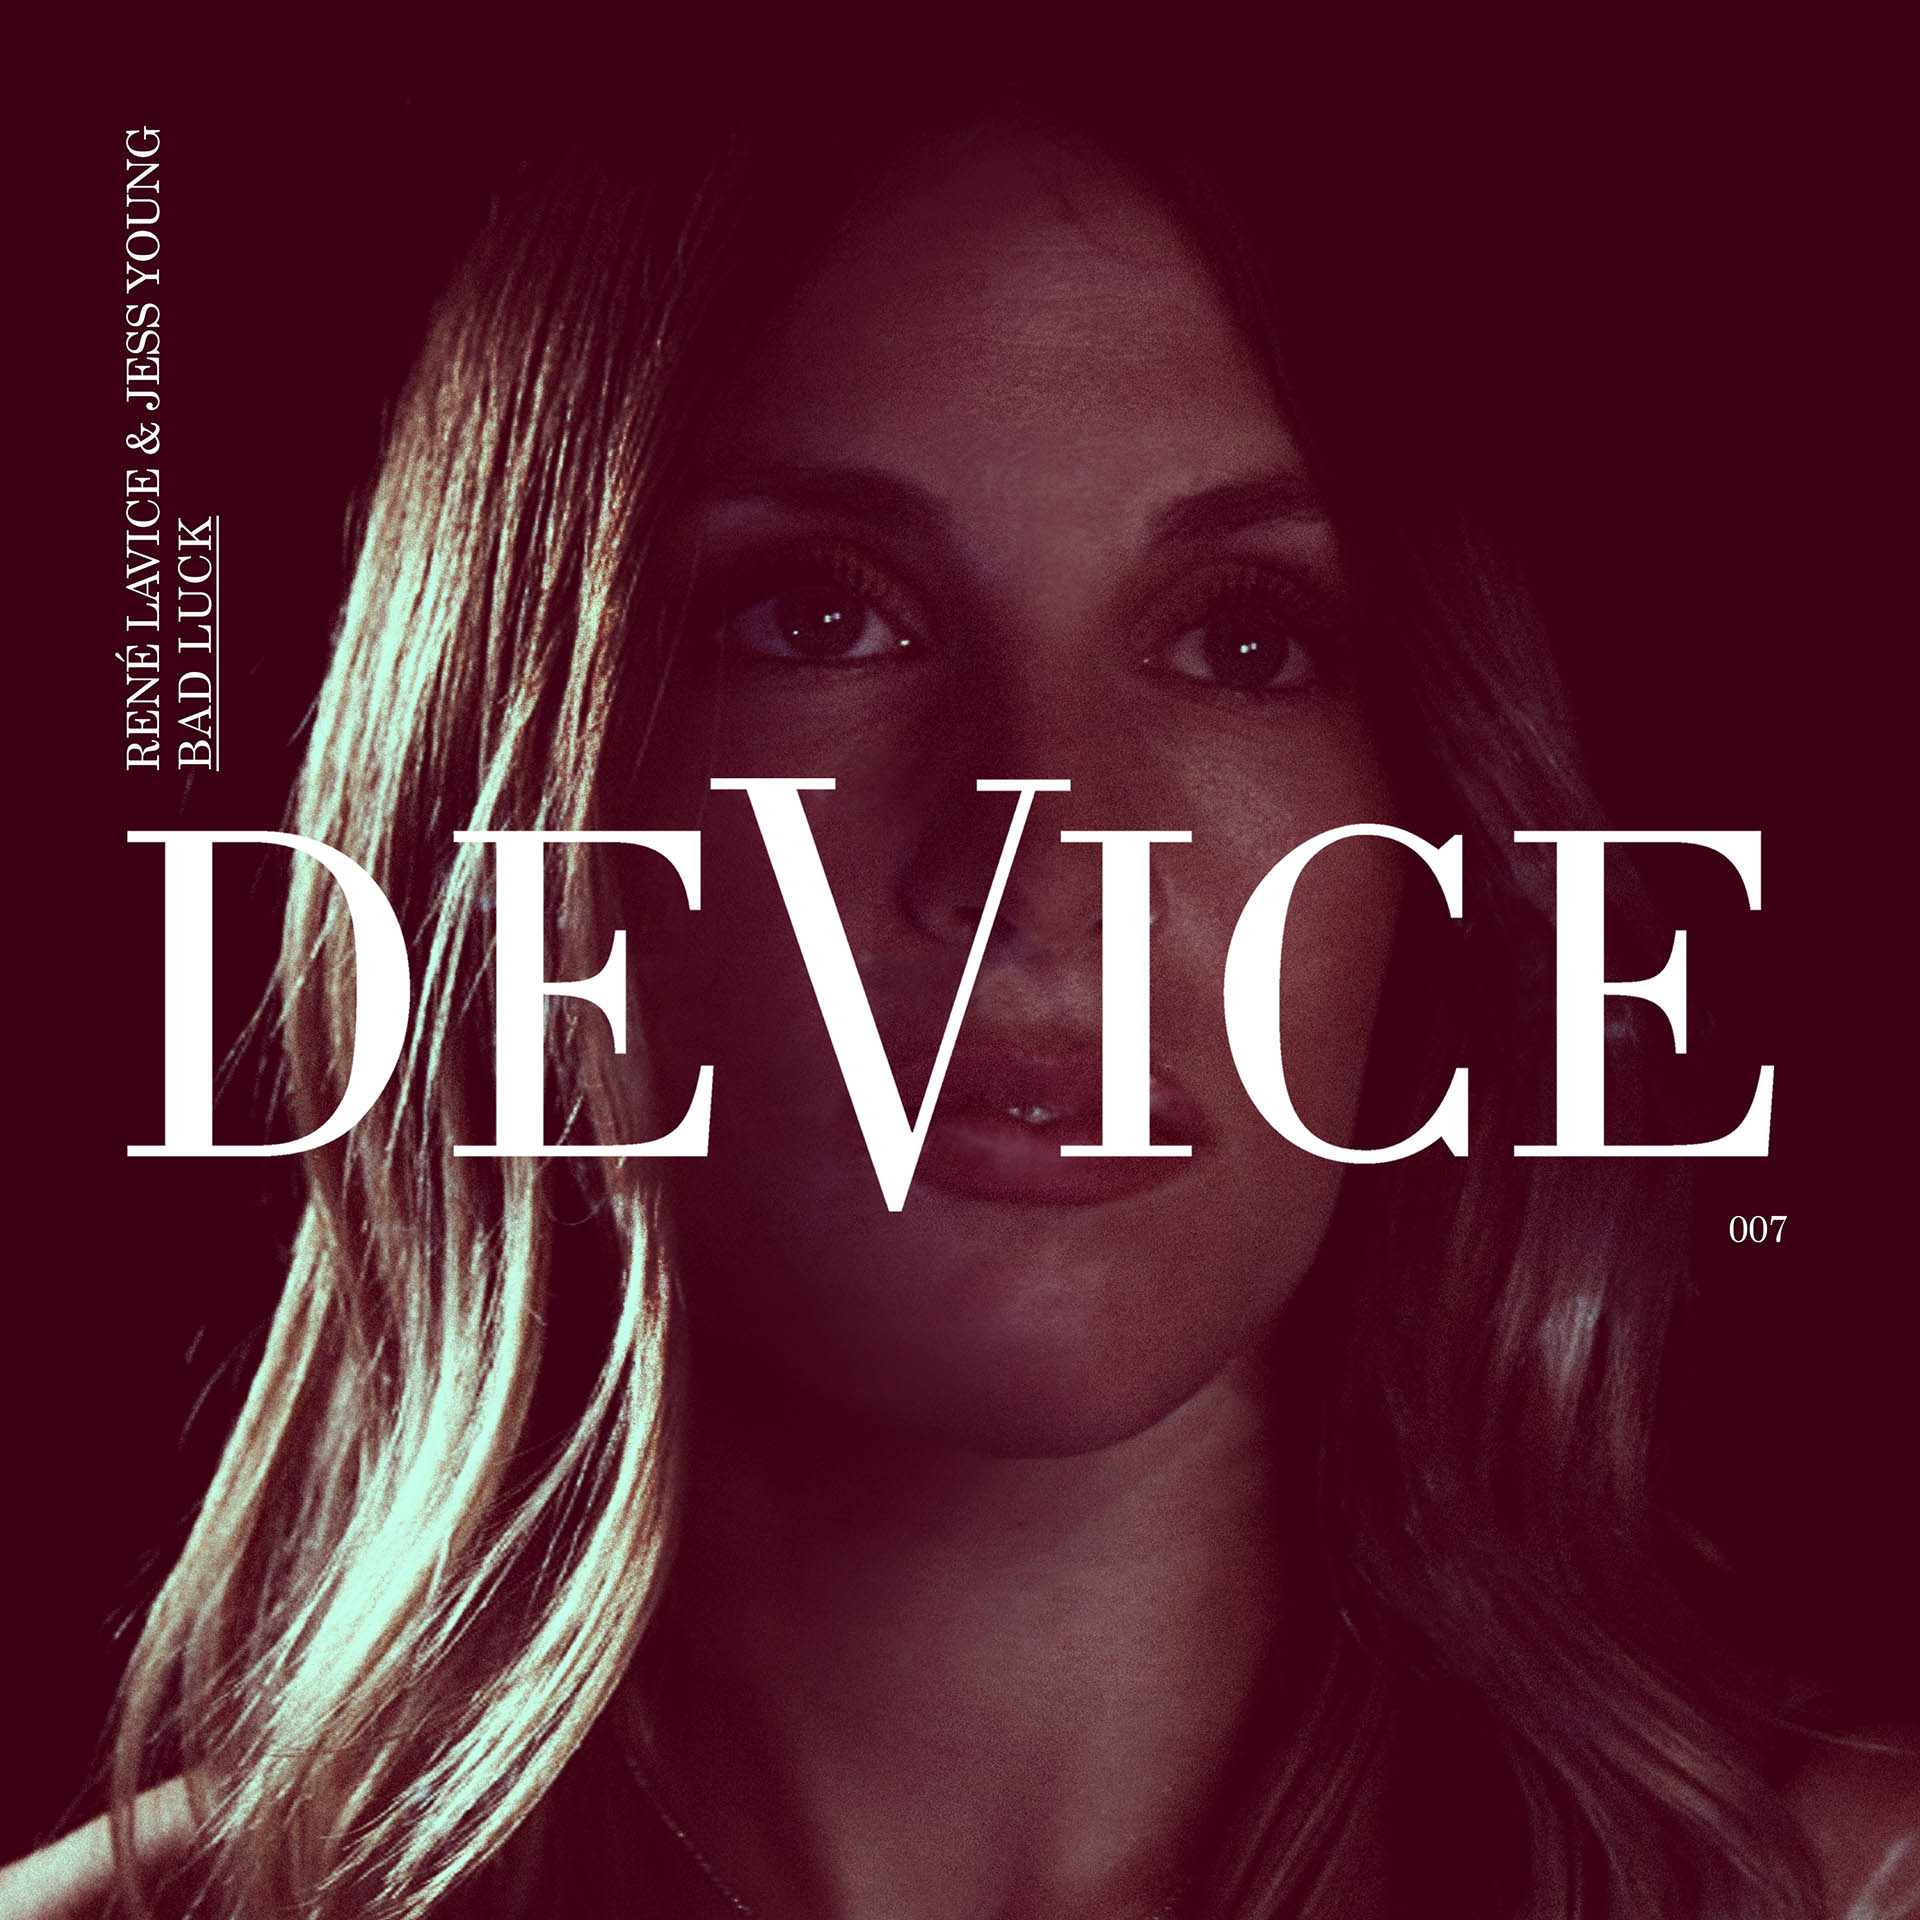 Renee Lavice and Jess Young - Device